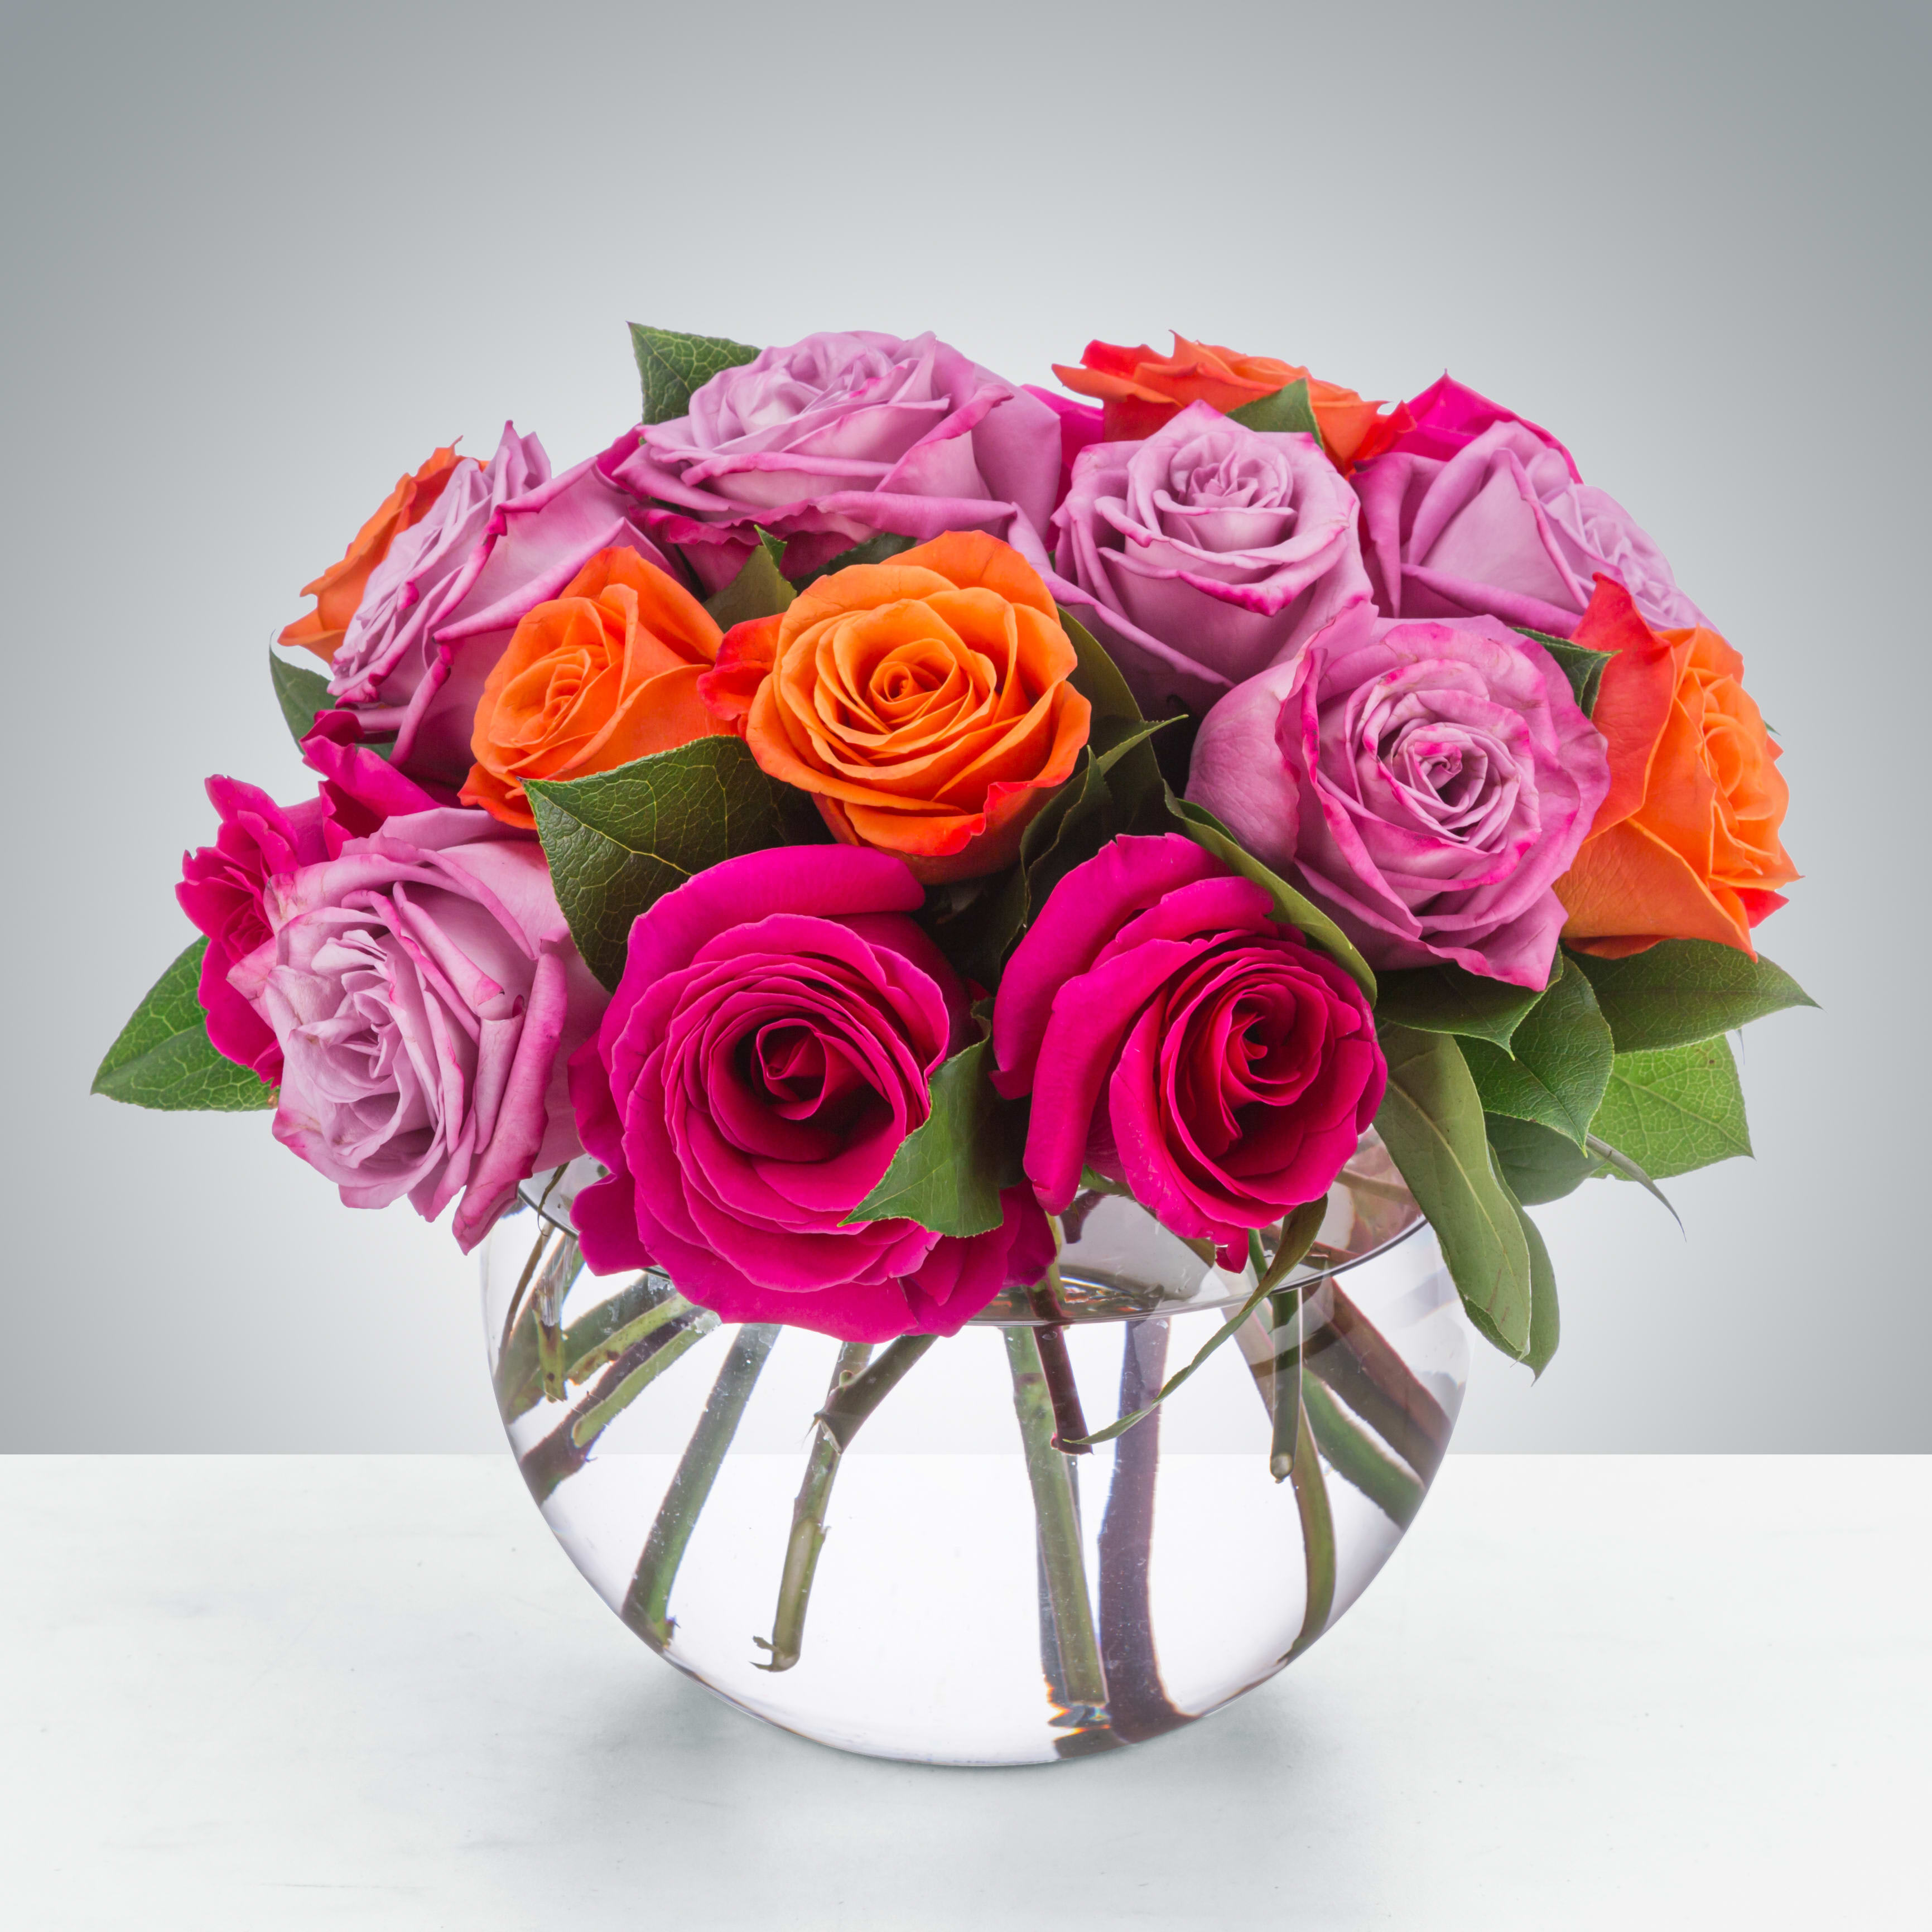 Daybreak  - A lovely bowl of colorful roses brightens and lifts any room (and relationship!) A great gift for sending on Valentine's Day to your significant other, your friend, or even your mom!  Approximate Dimensions: 11''D x 11''H